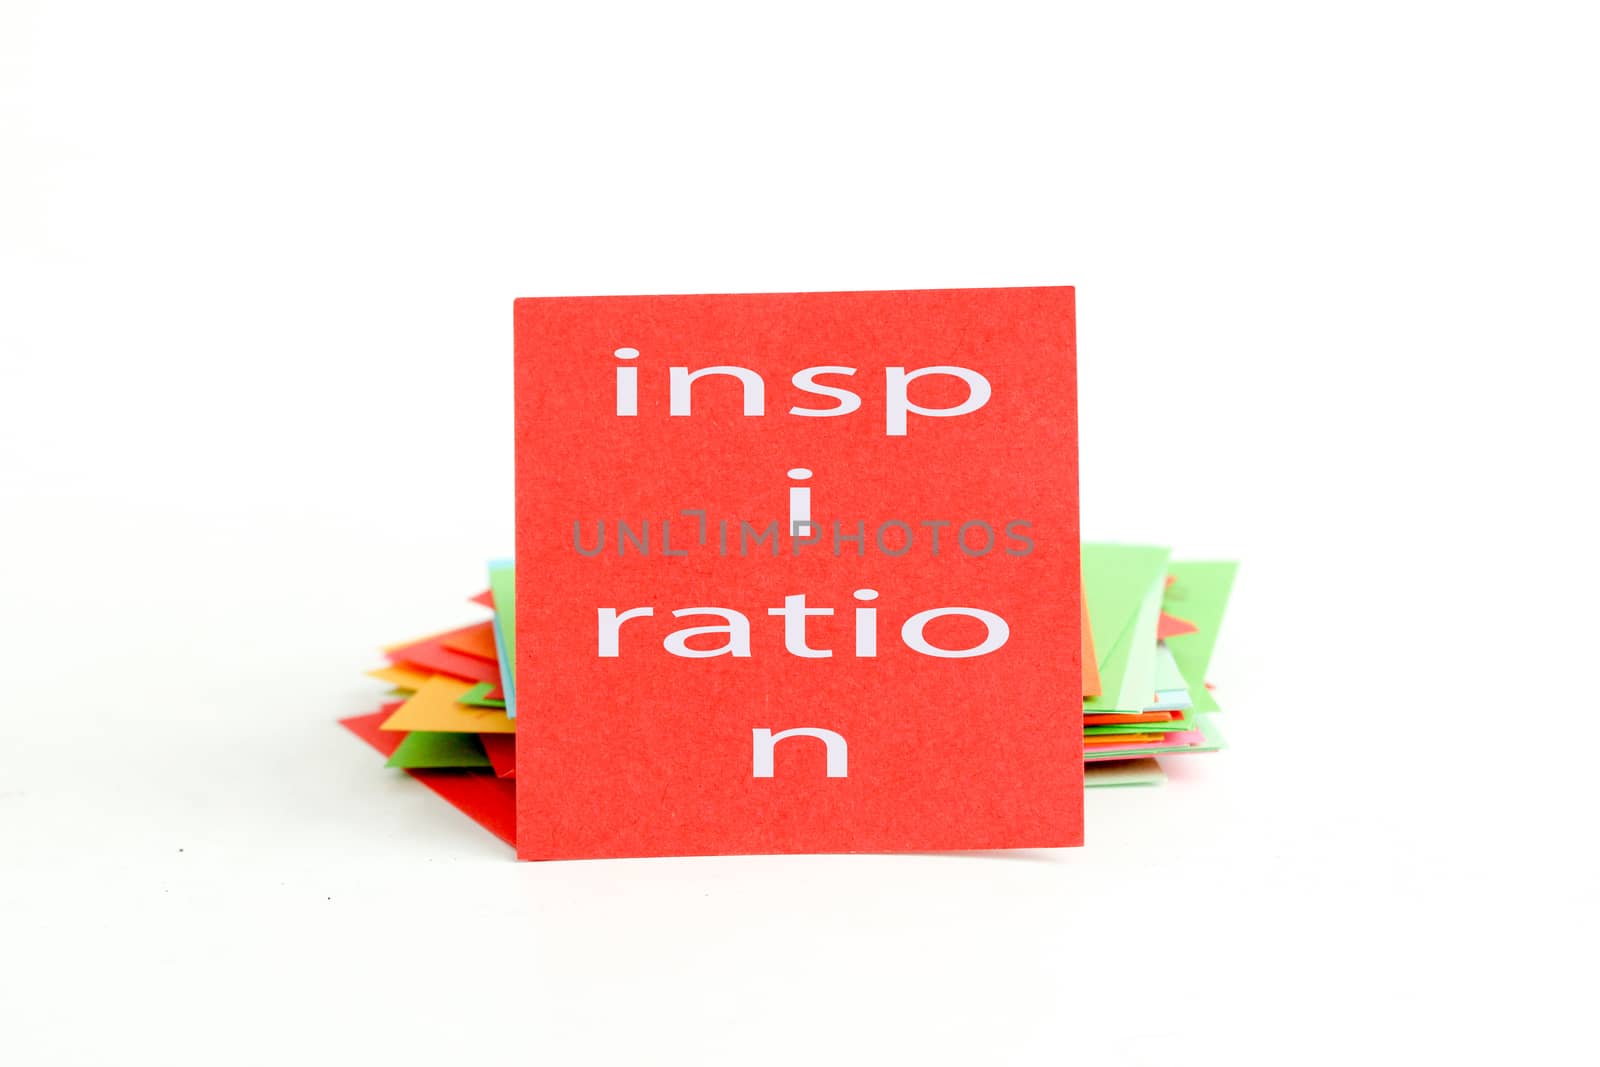 picture of a red note paper with text inspiration